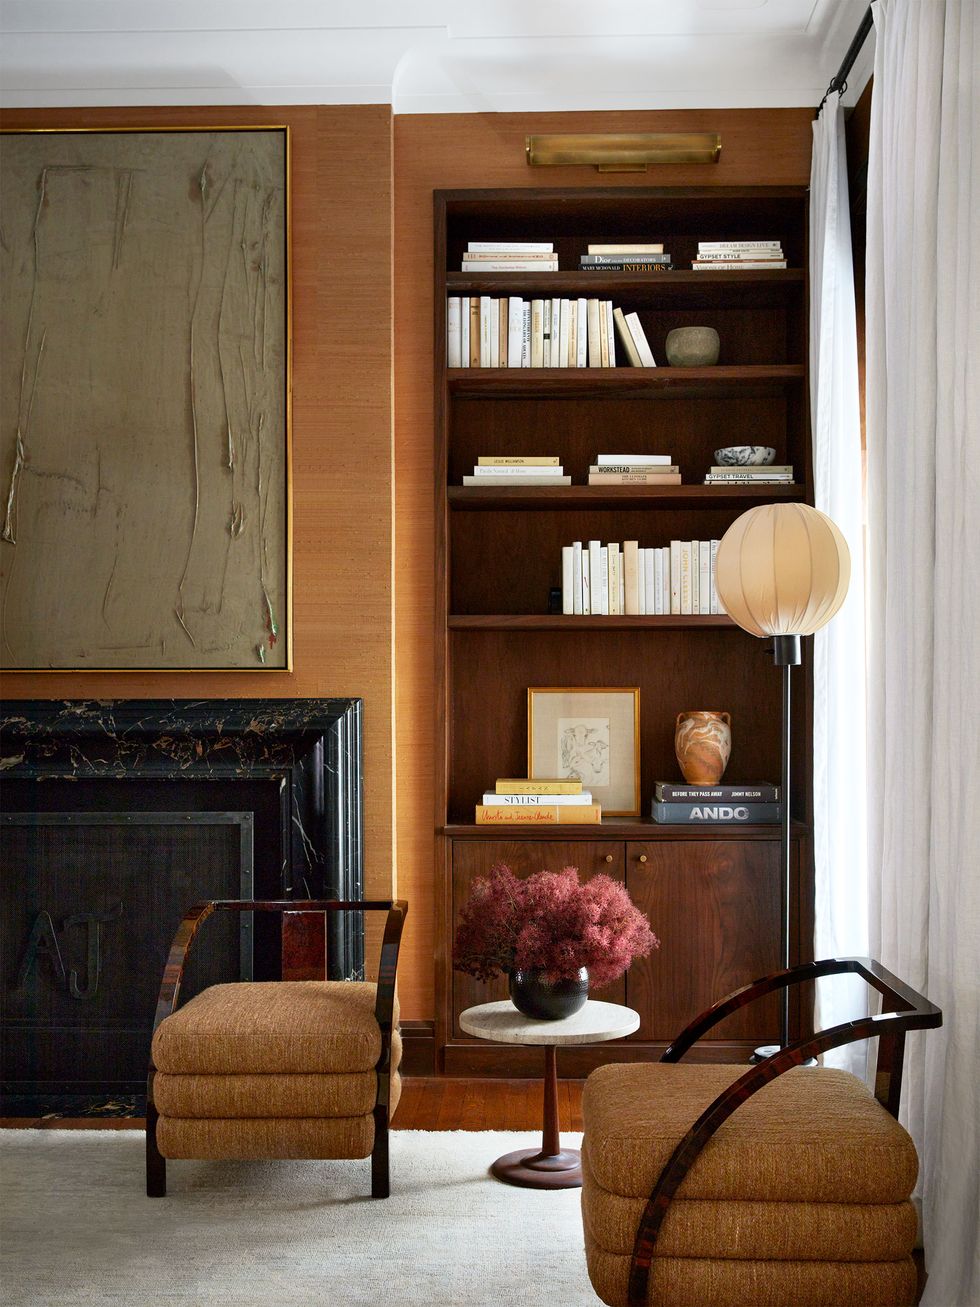 in the corner of the bedroom are two chairs with three seat cushions each, a small round marble topped pedestal table, a floor lamp with a globe shade, built in book shelves, and a black marble fireplace